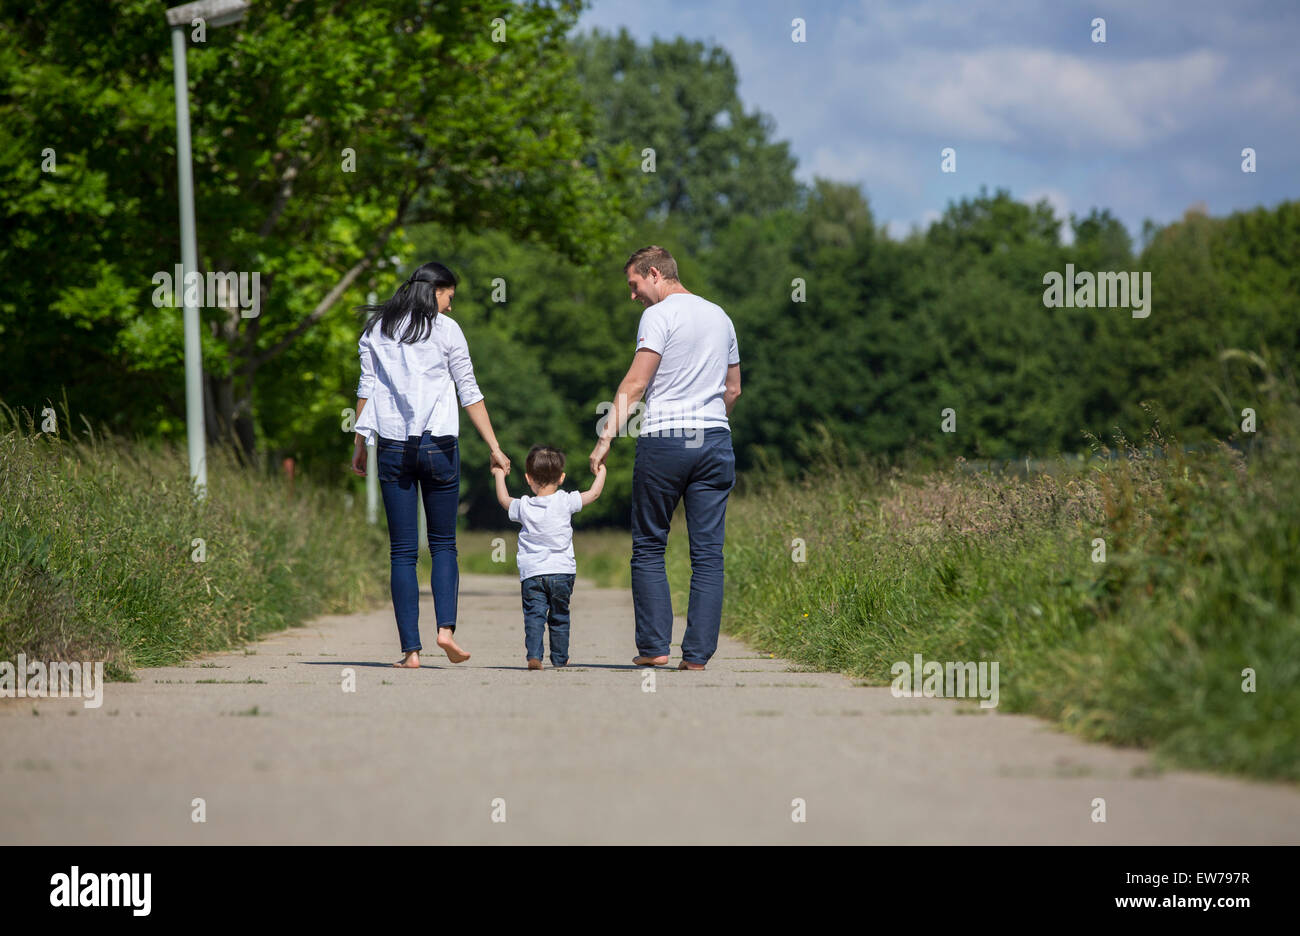 Family with one child Stock Photo